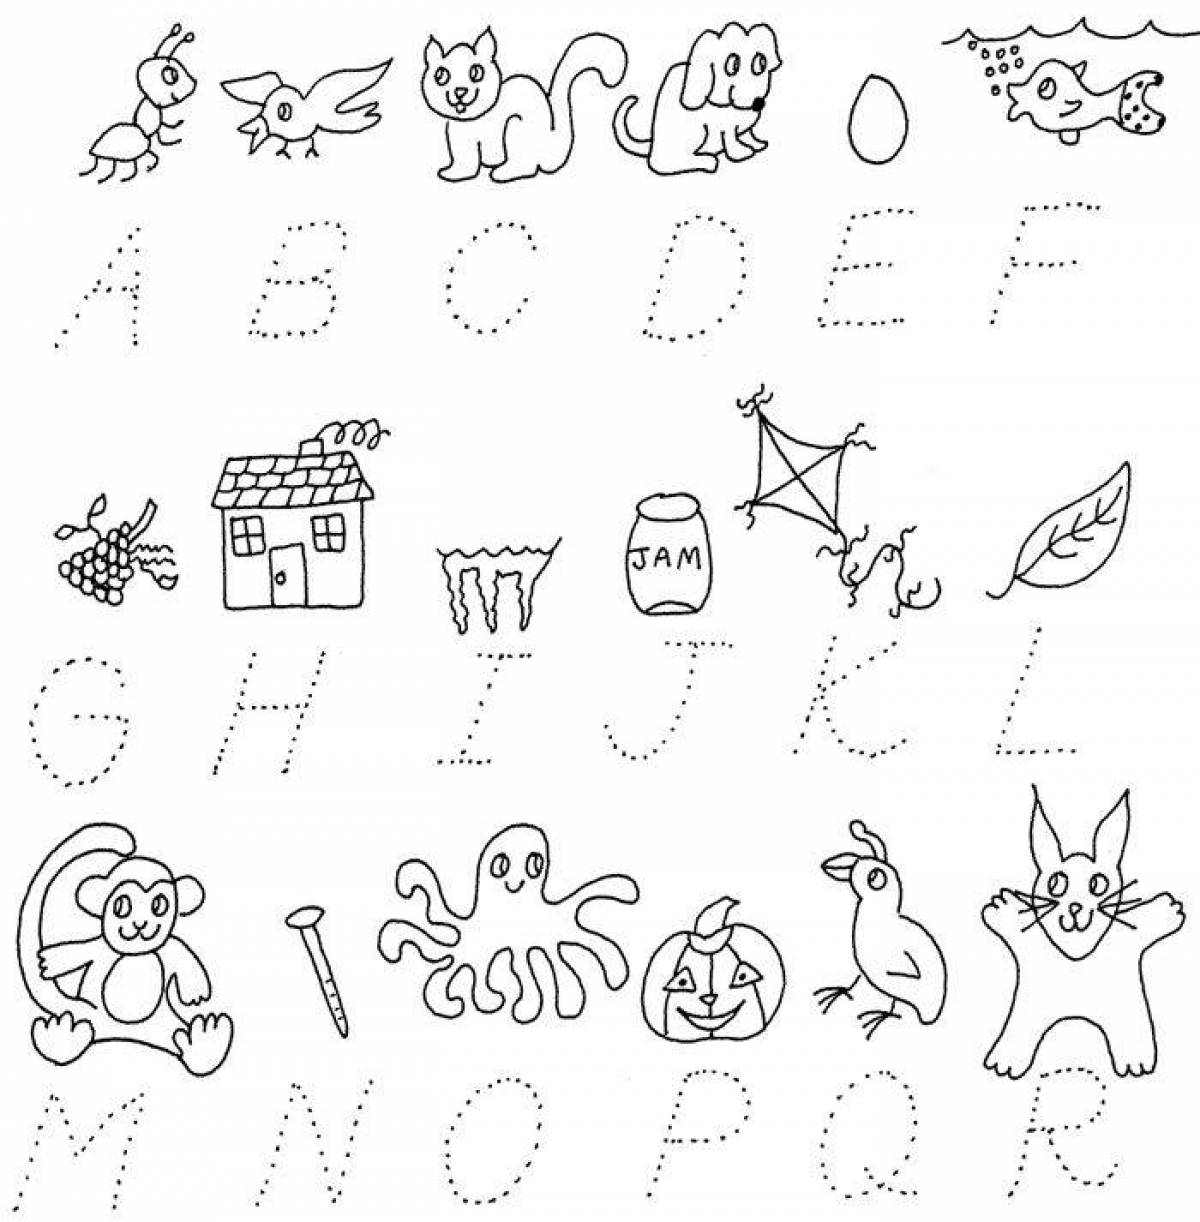 Adorable alphabet knowledge coloring page